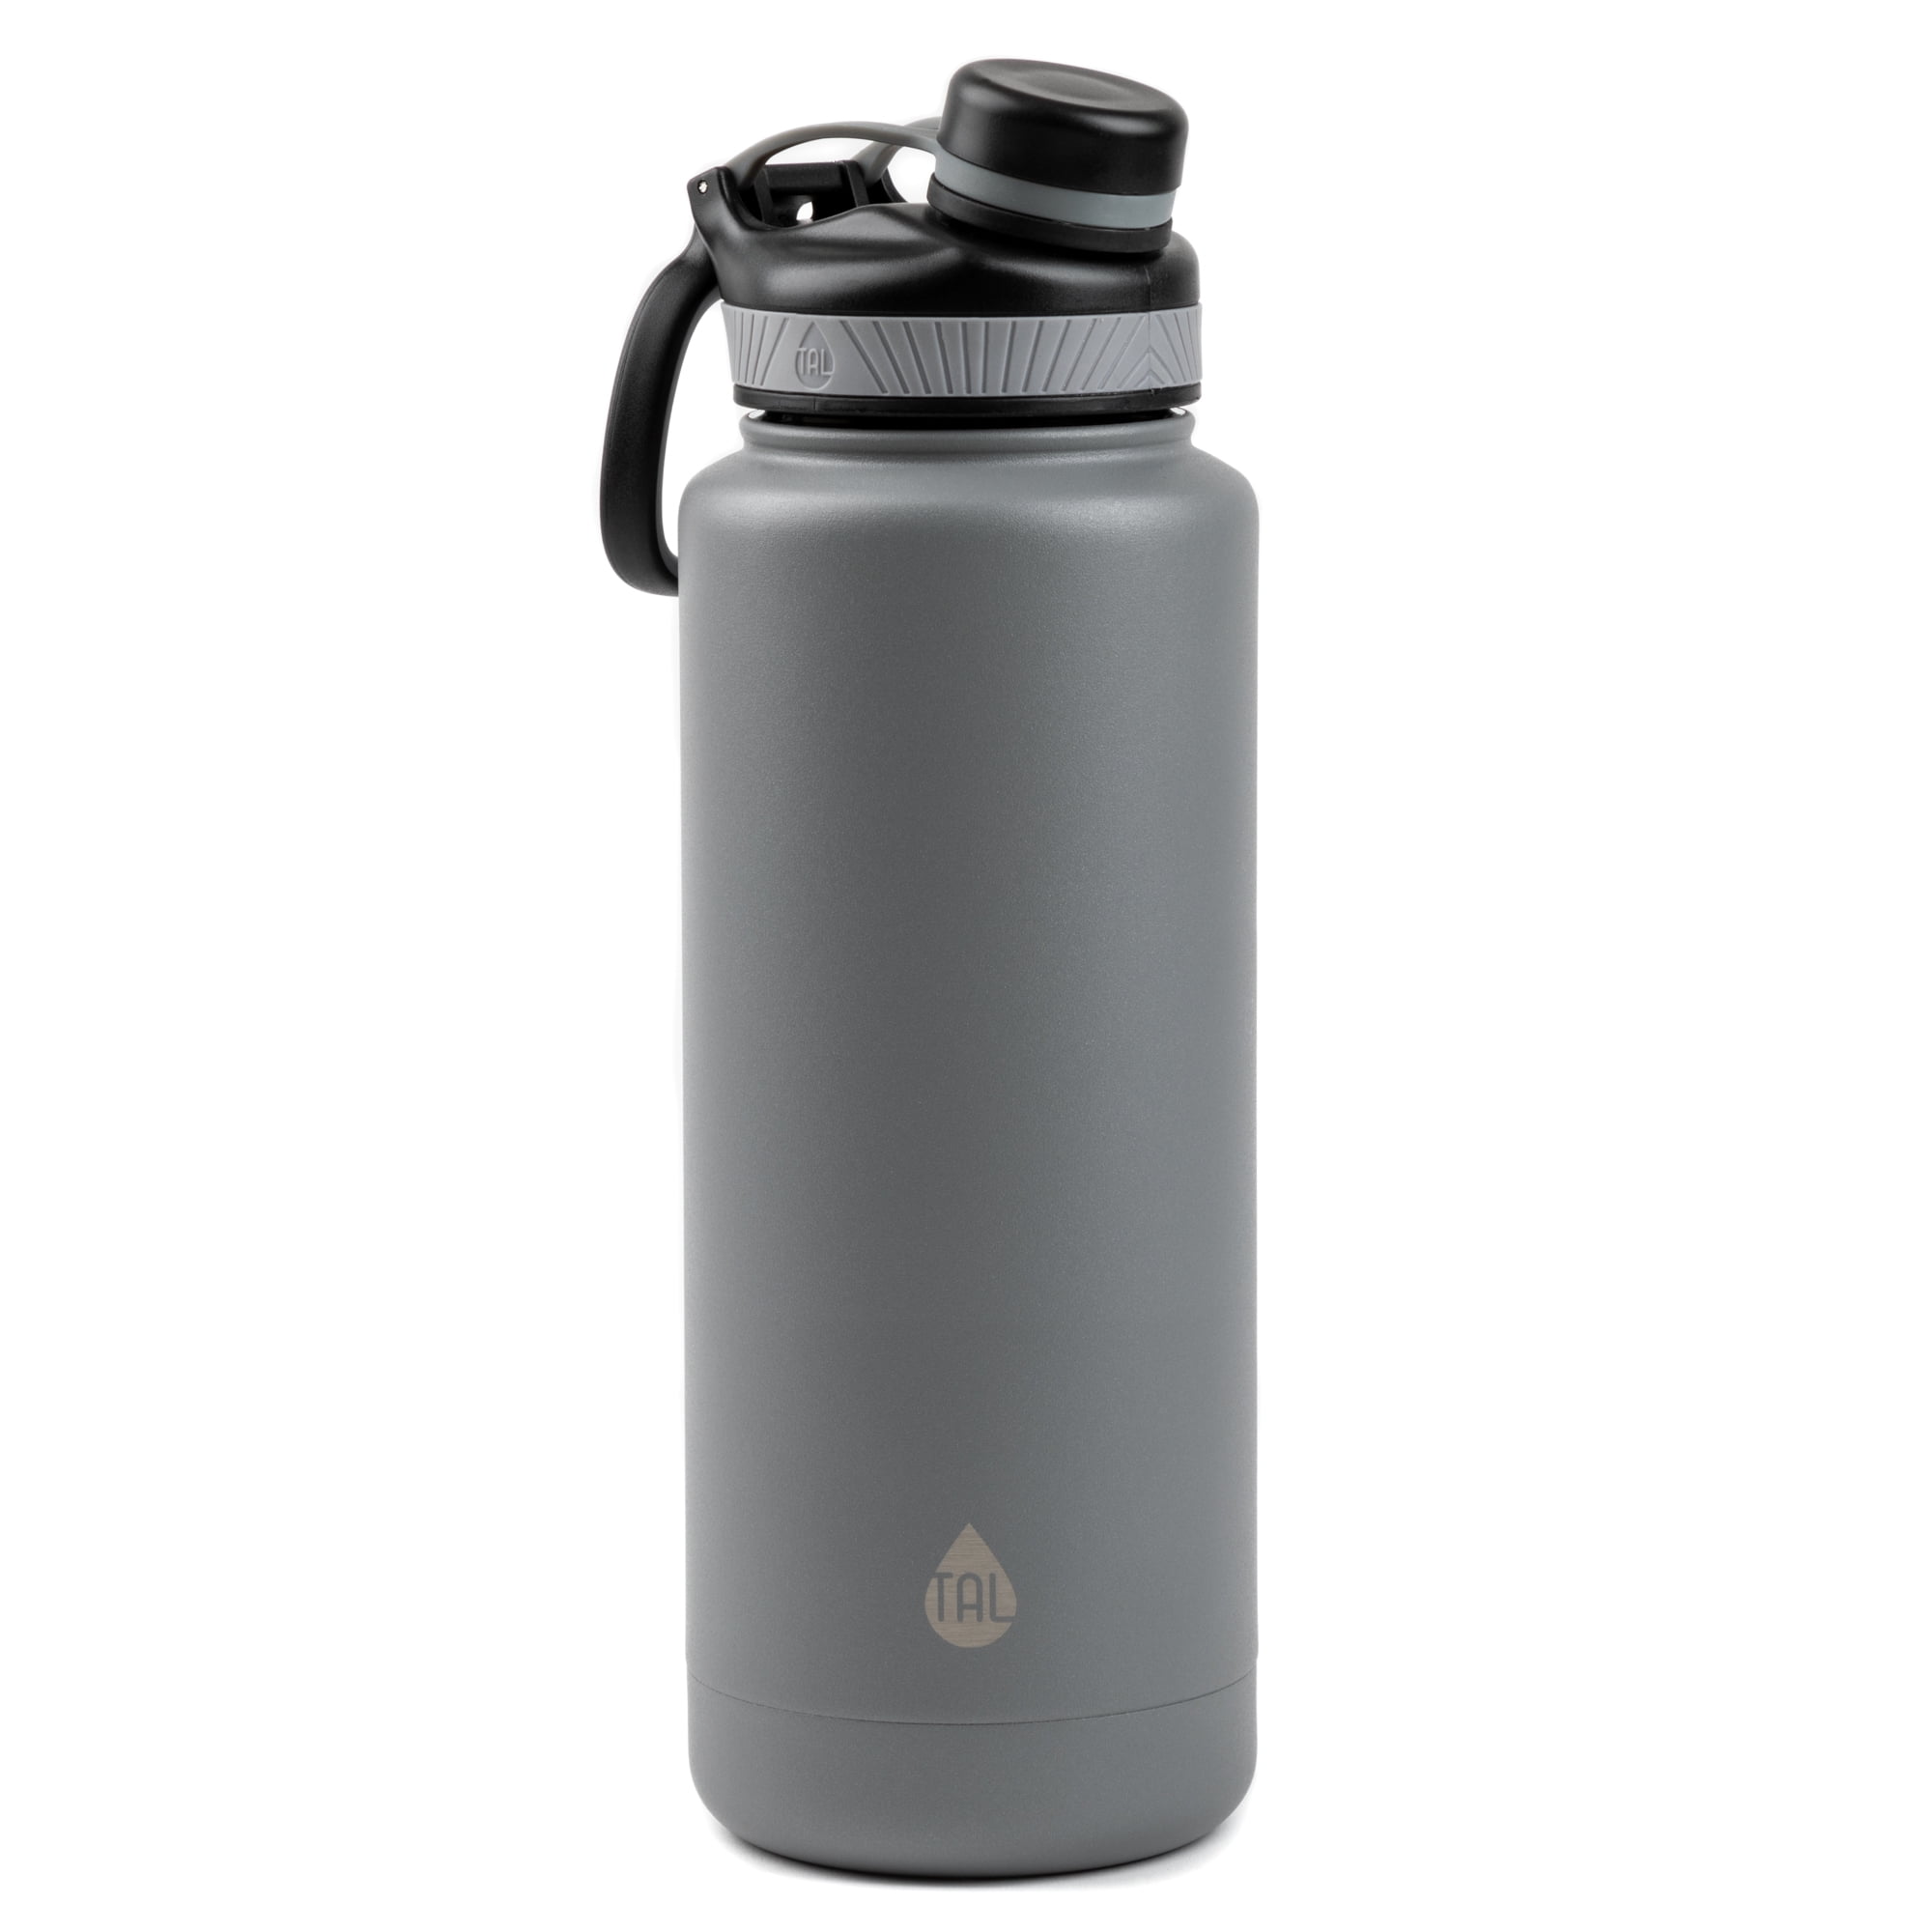 TAL Ranger 40 oz Gray and Black Stainless Steel Water Bottle with Wide Mouth Lid